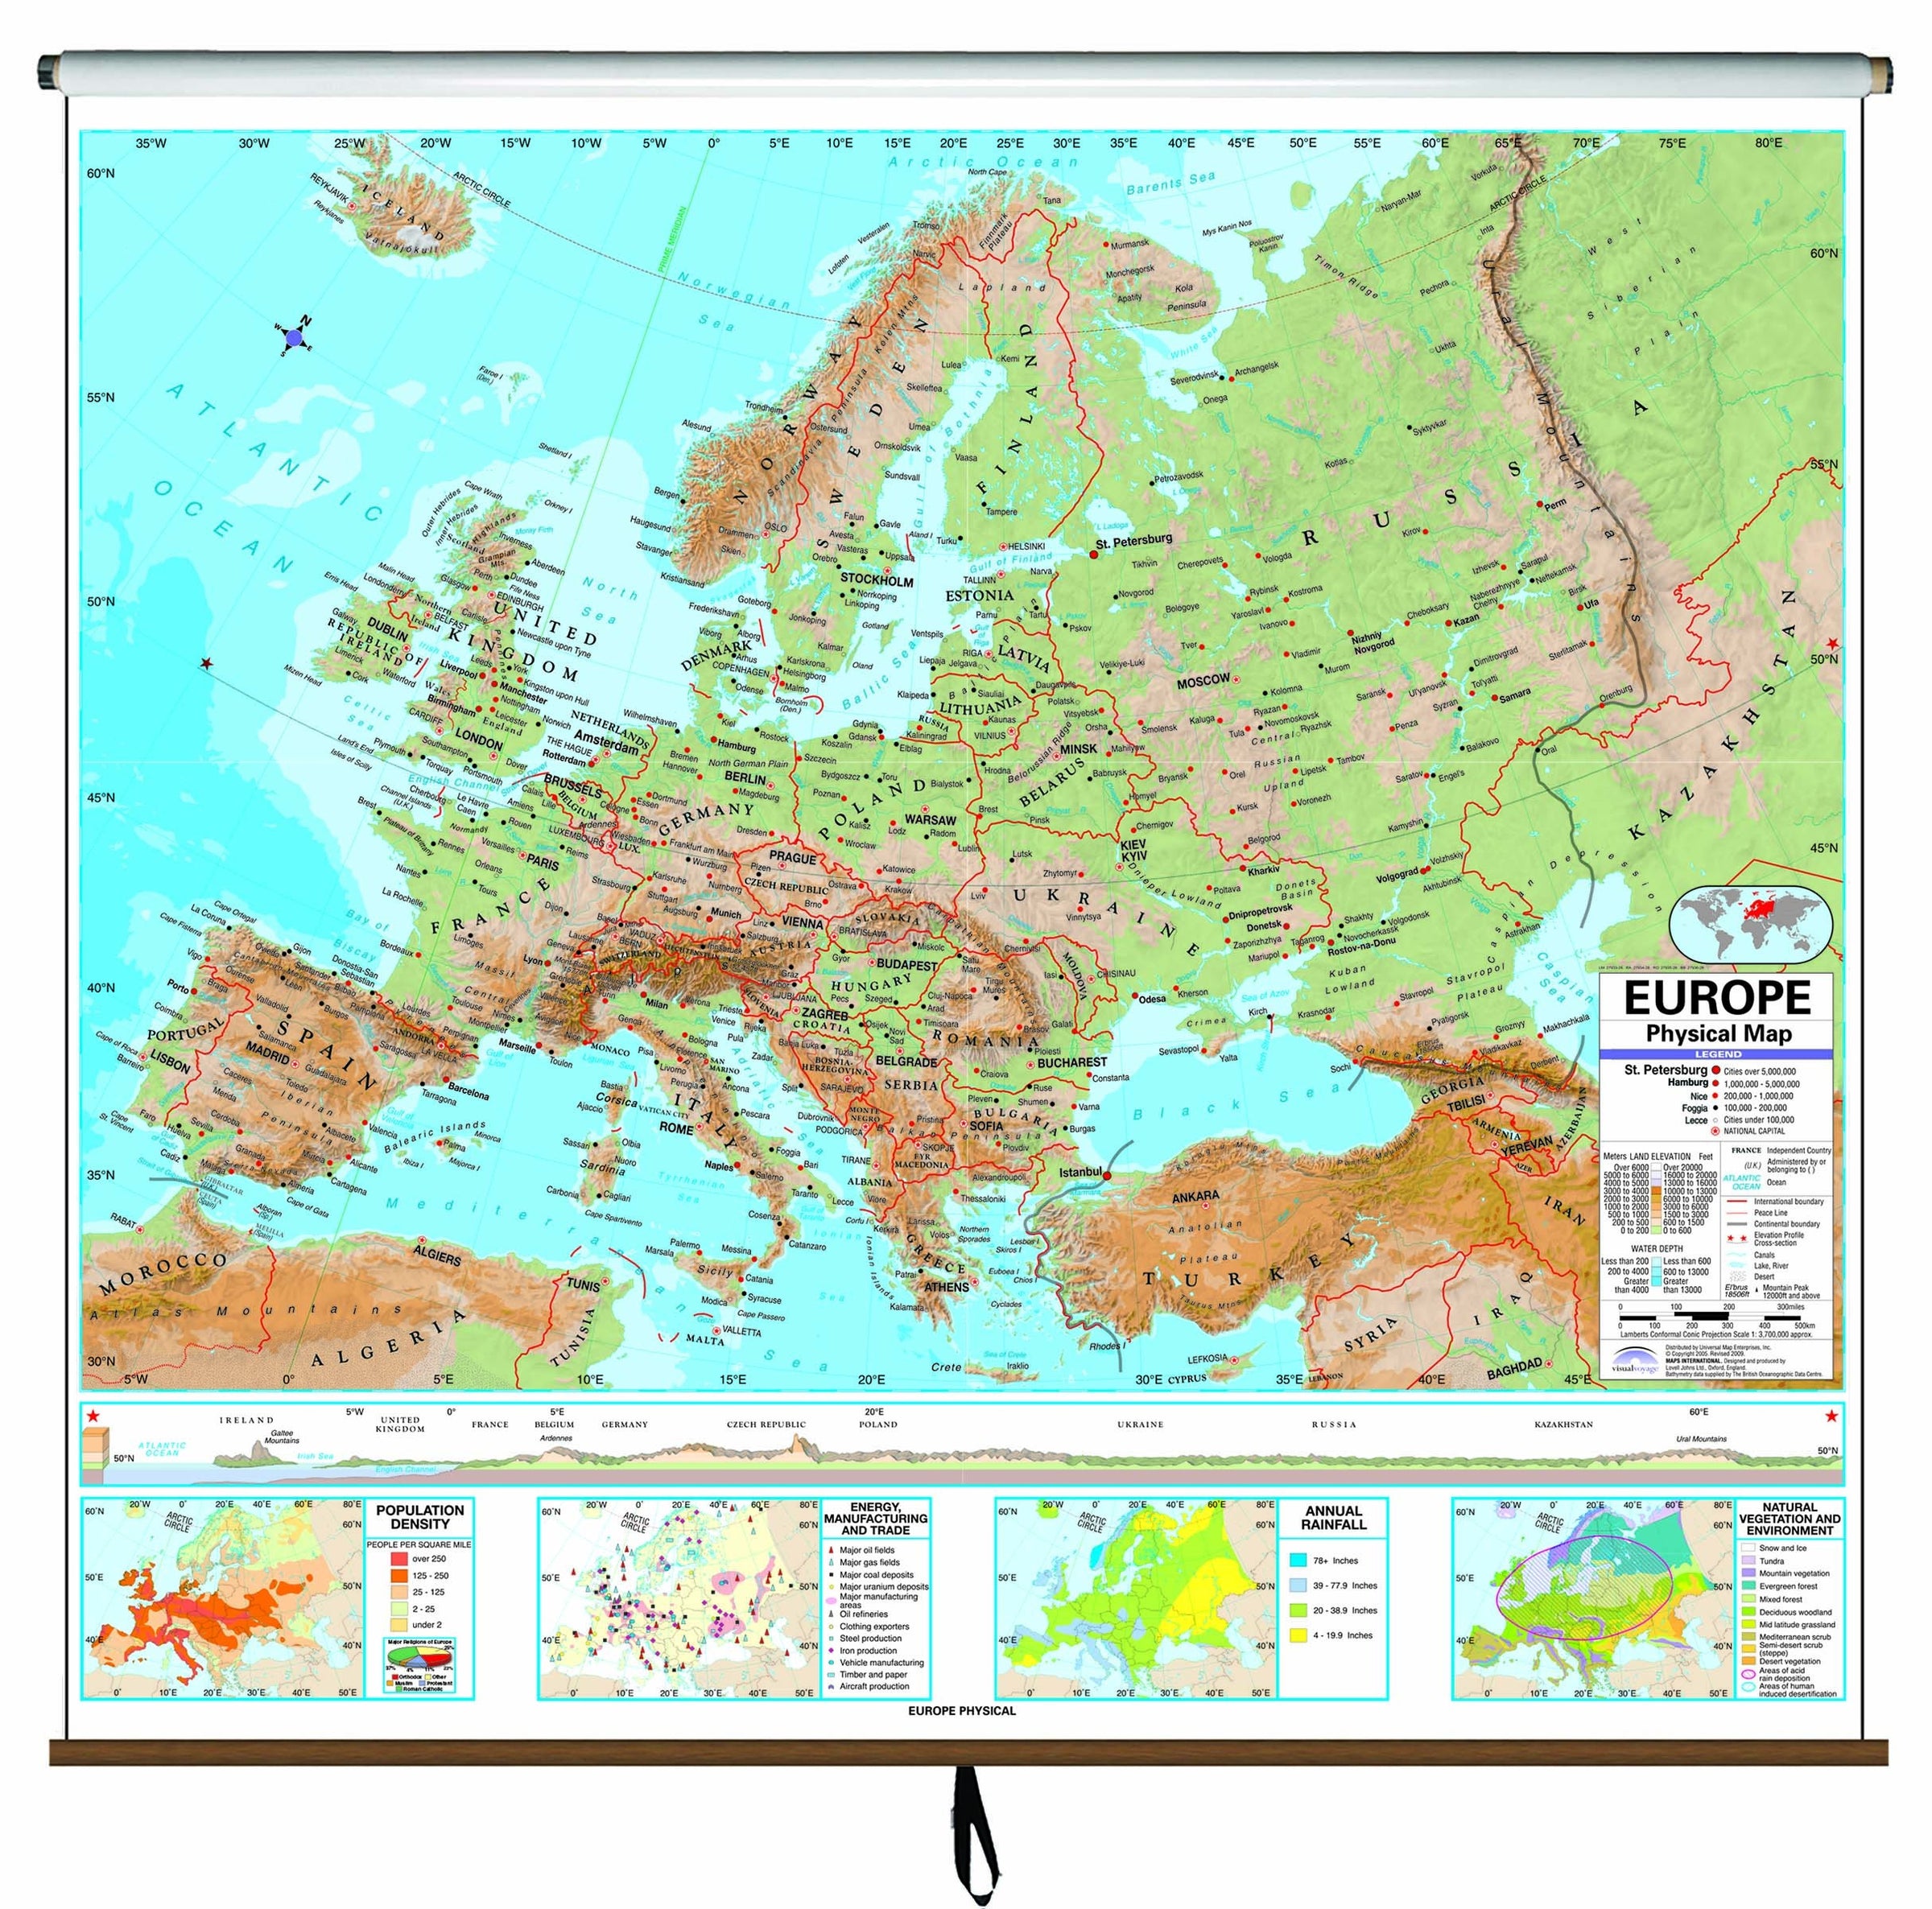 natural resources of europe map